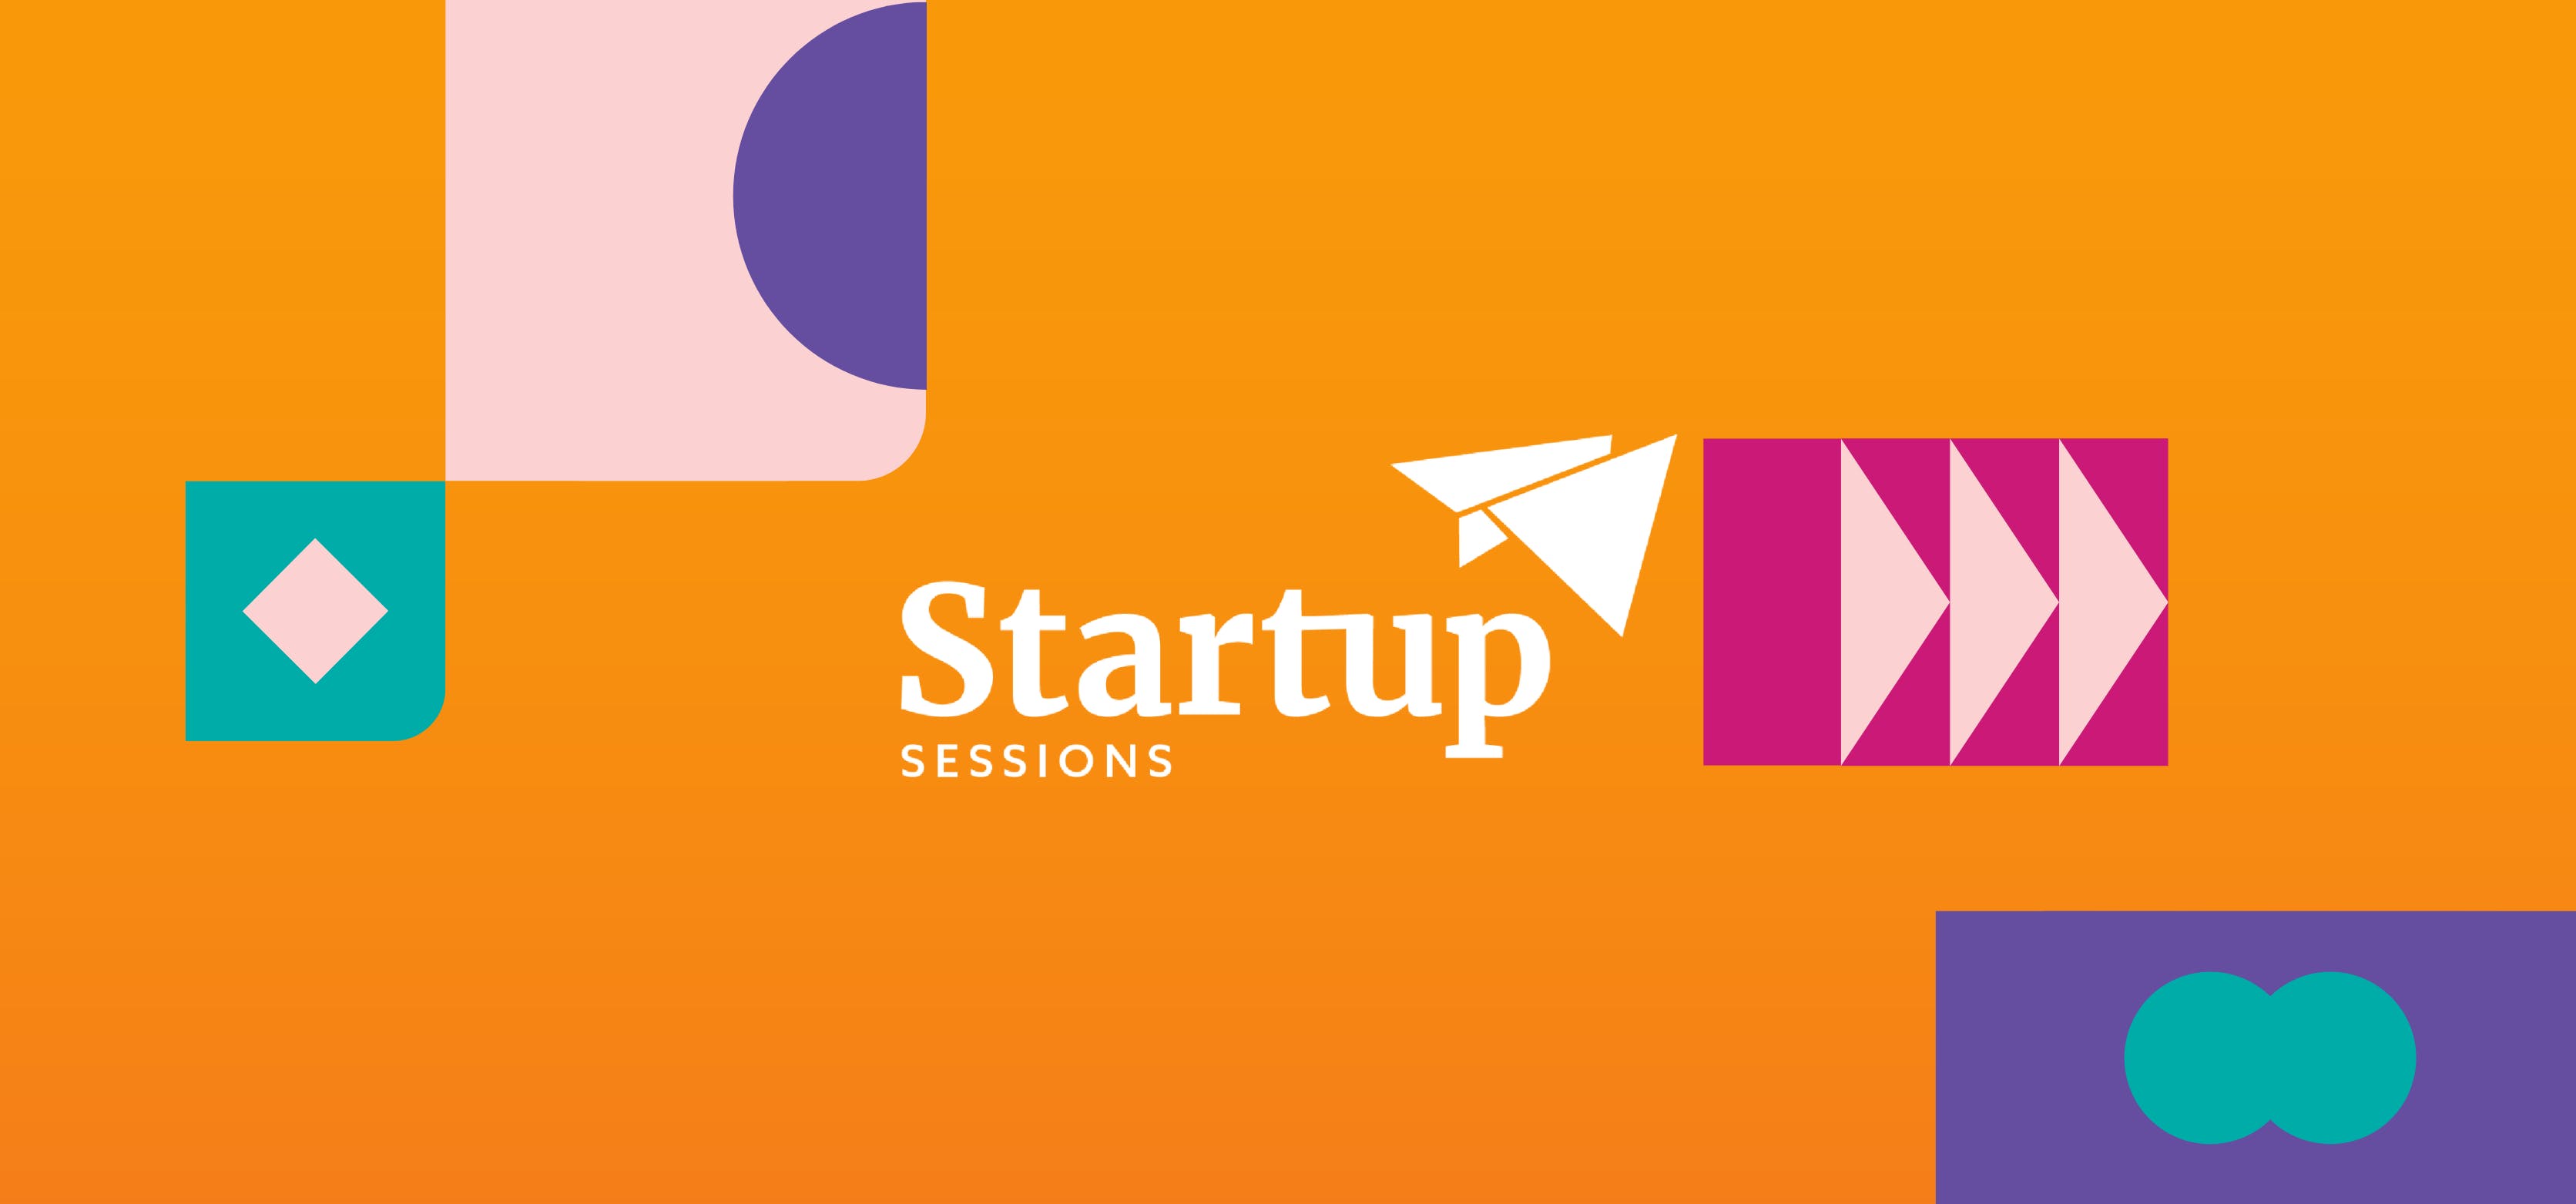 An image featuring multiple flat shapes in different colors and sizes on a plain background. In the center of the image is 'Startup Sessions' lettering.